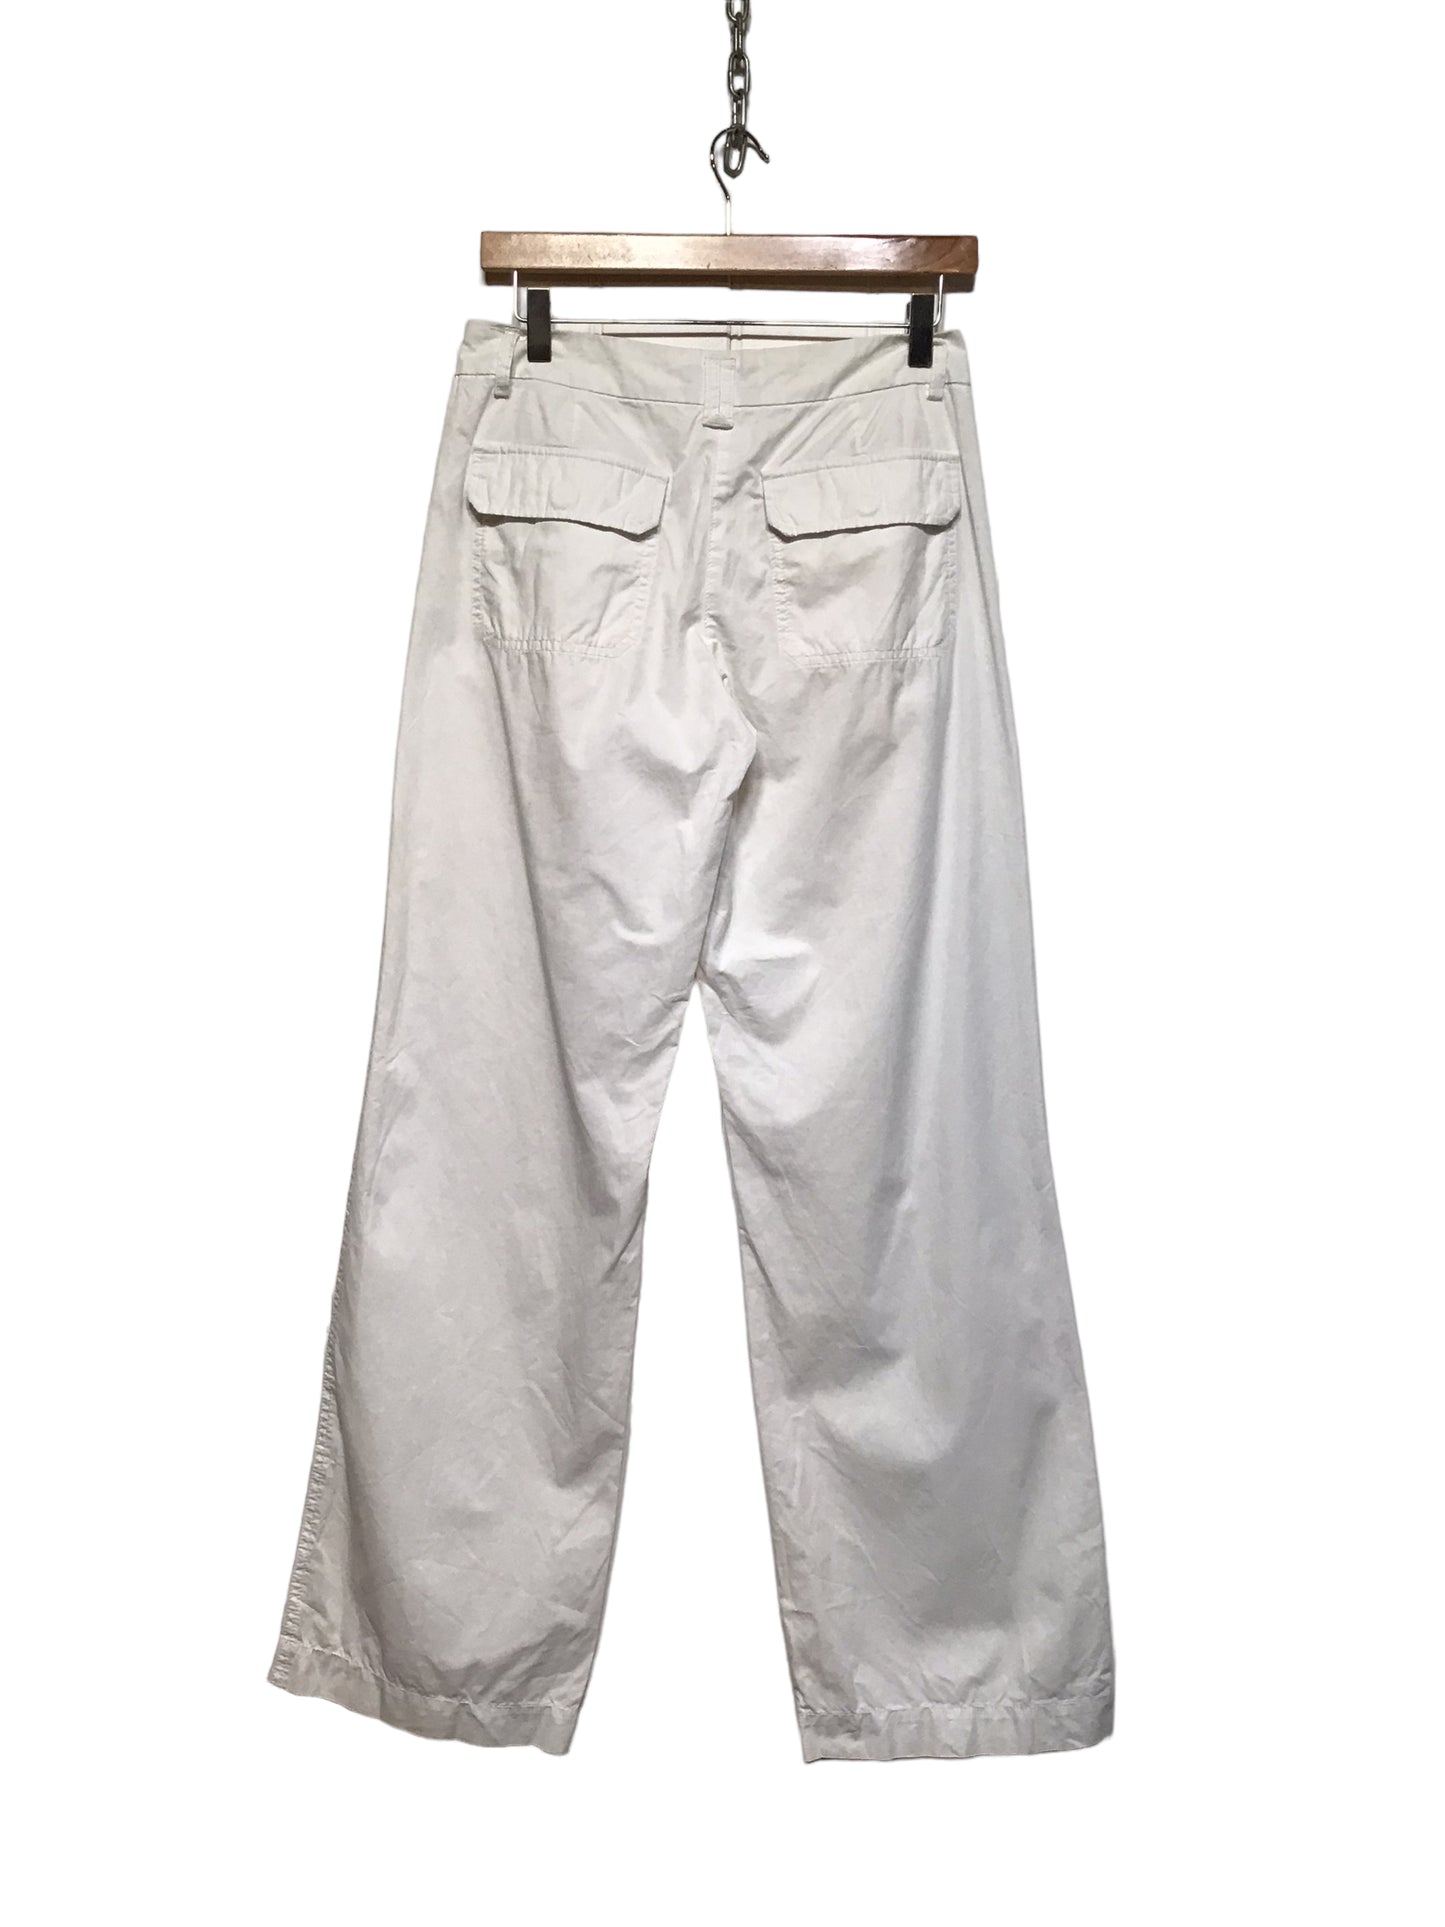 Turnover Trousers (Size S)